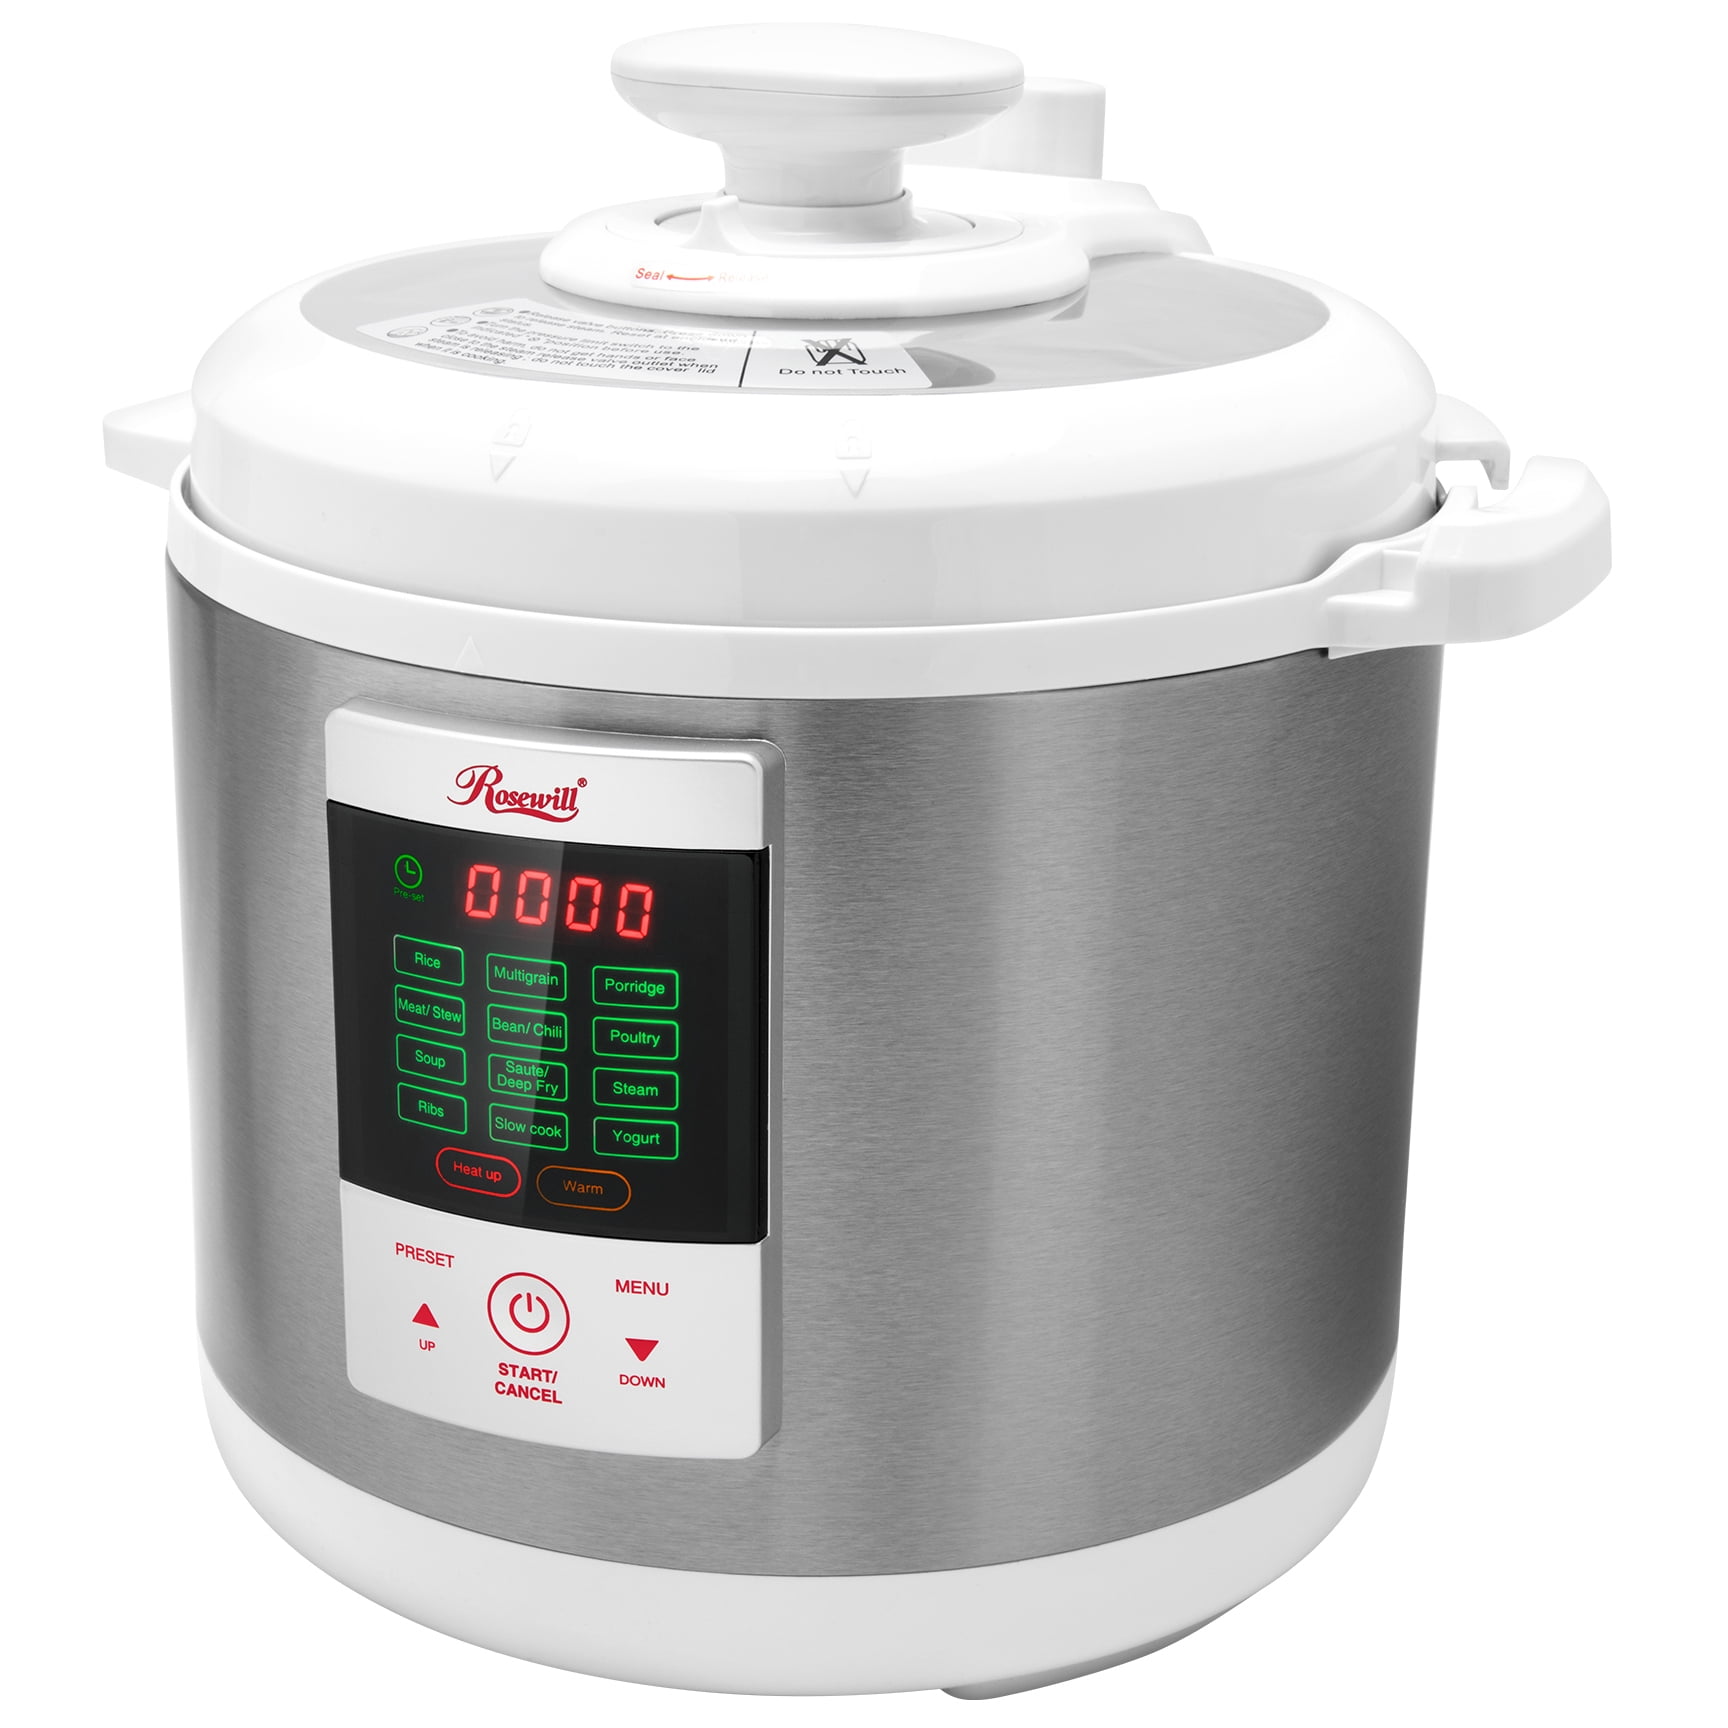 Zavor LUX Multicooker, Electric Pressure Cooker and Slow and Rice 